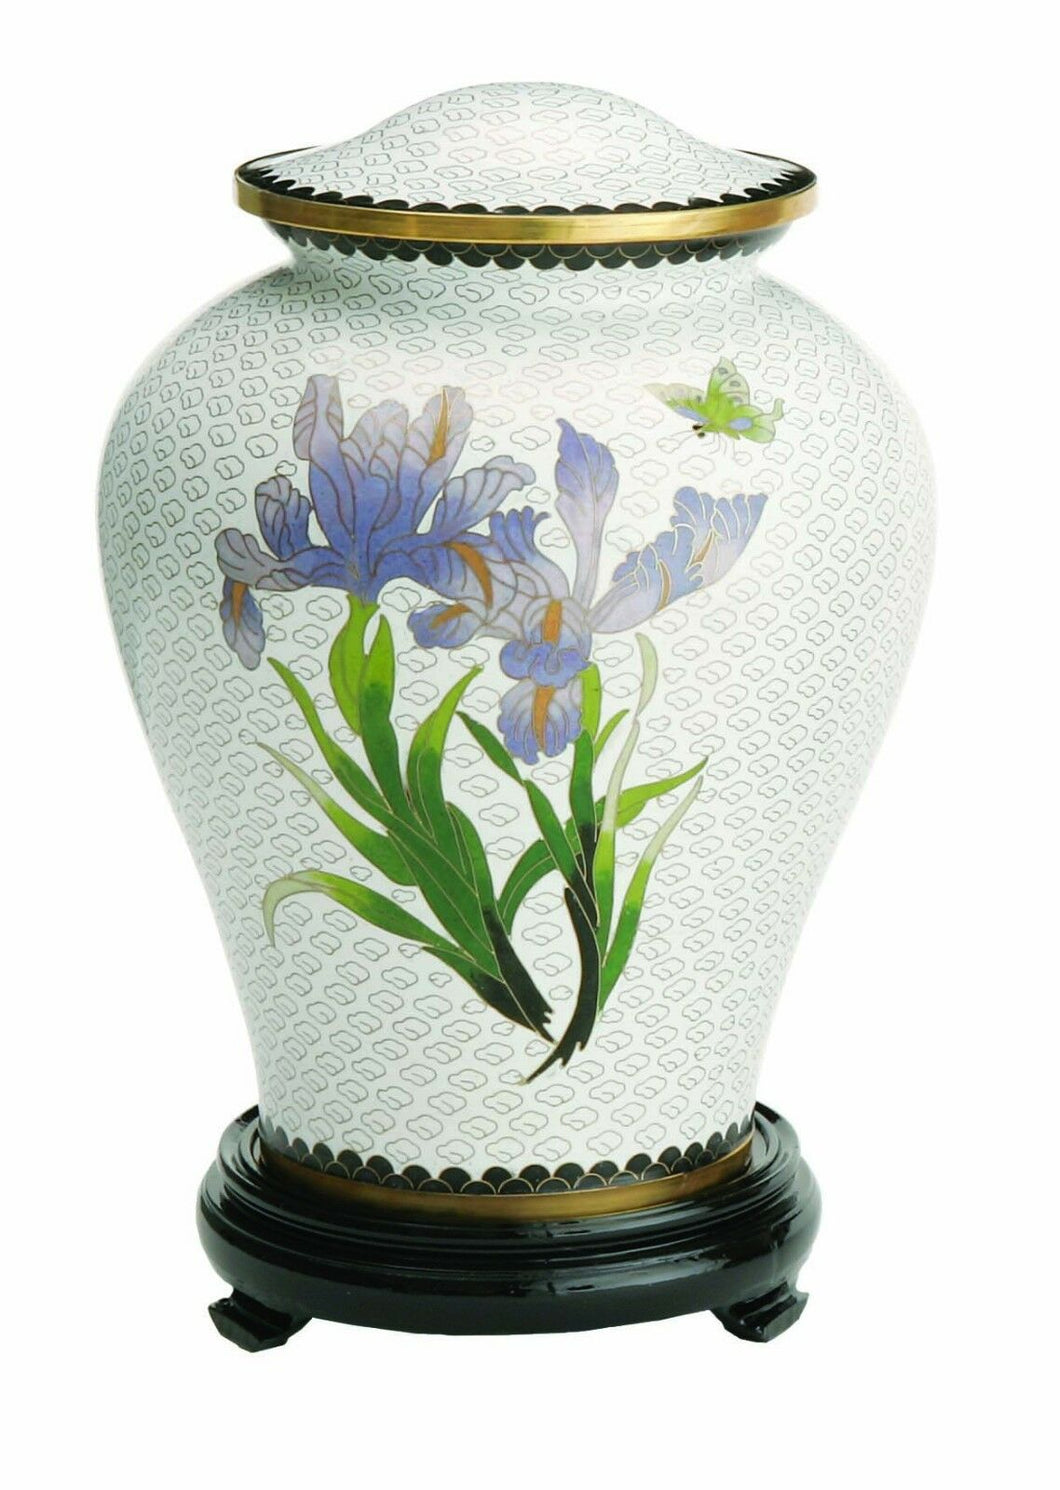 Large/Adult 210 cubic inches White Iris Cloisonne Cremation Urn with Flowers